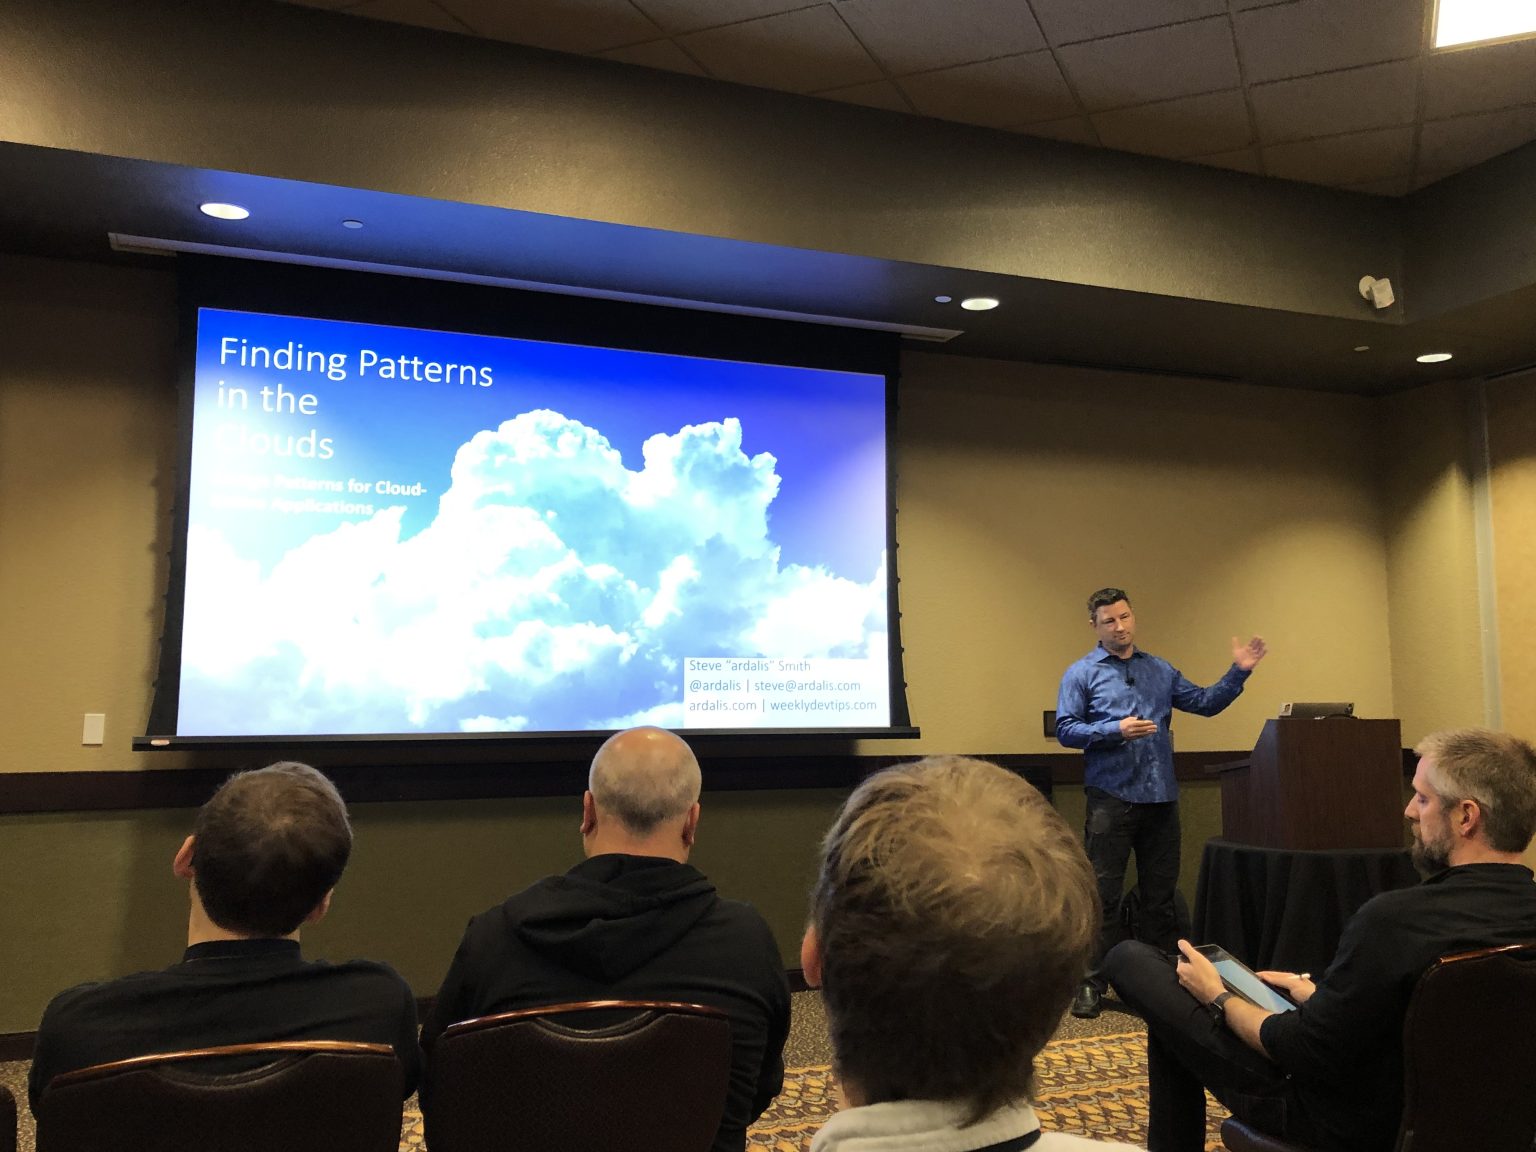 Steve Smith presenting on Cloud Design Patterns at Codemash 2020.